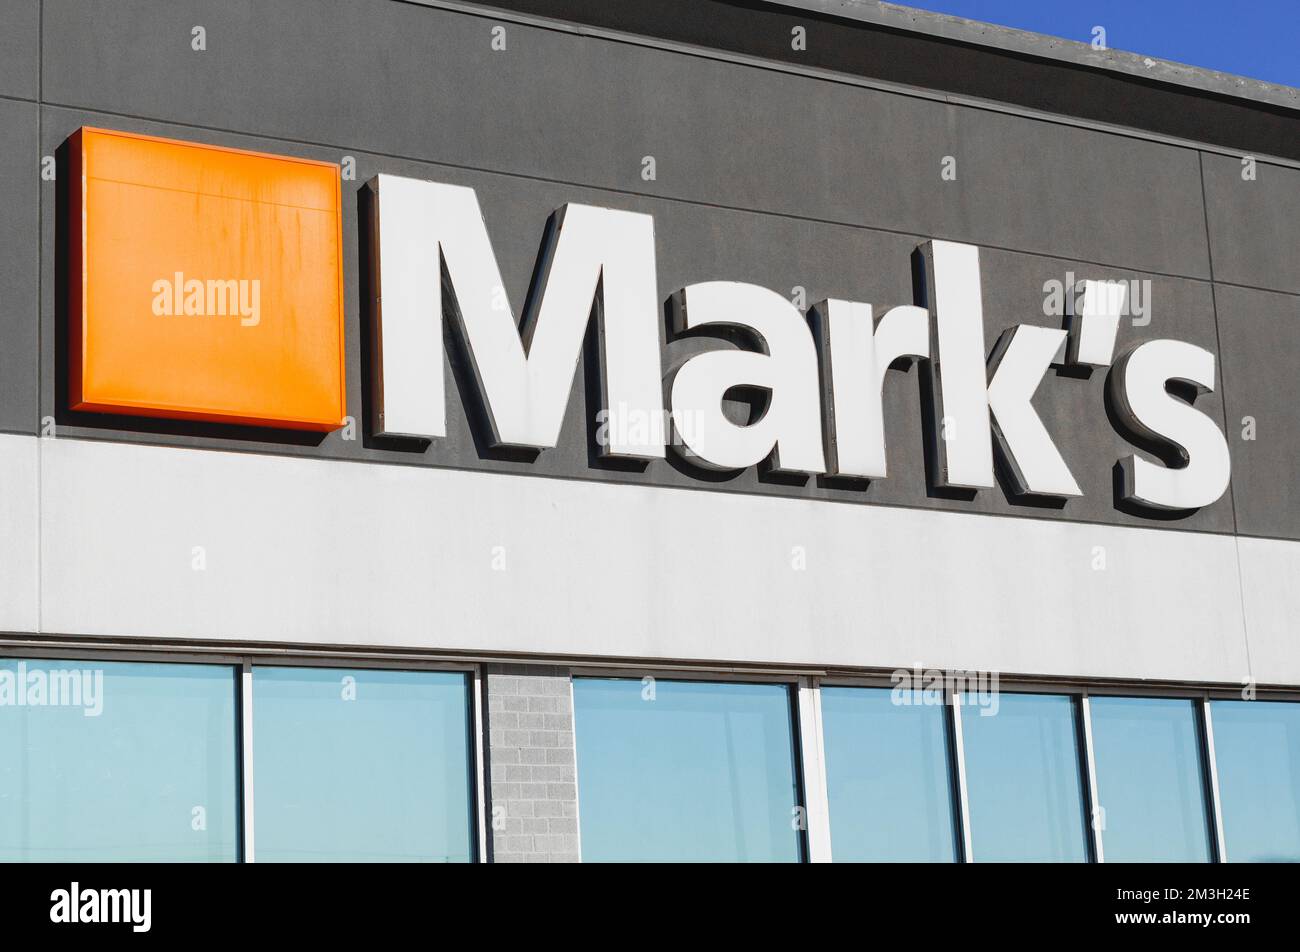 Truro, Canada - December 14, 2022: Mark's Storefront. Mark's is a Canadian clothing and footwear retailer. Stock Photo